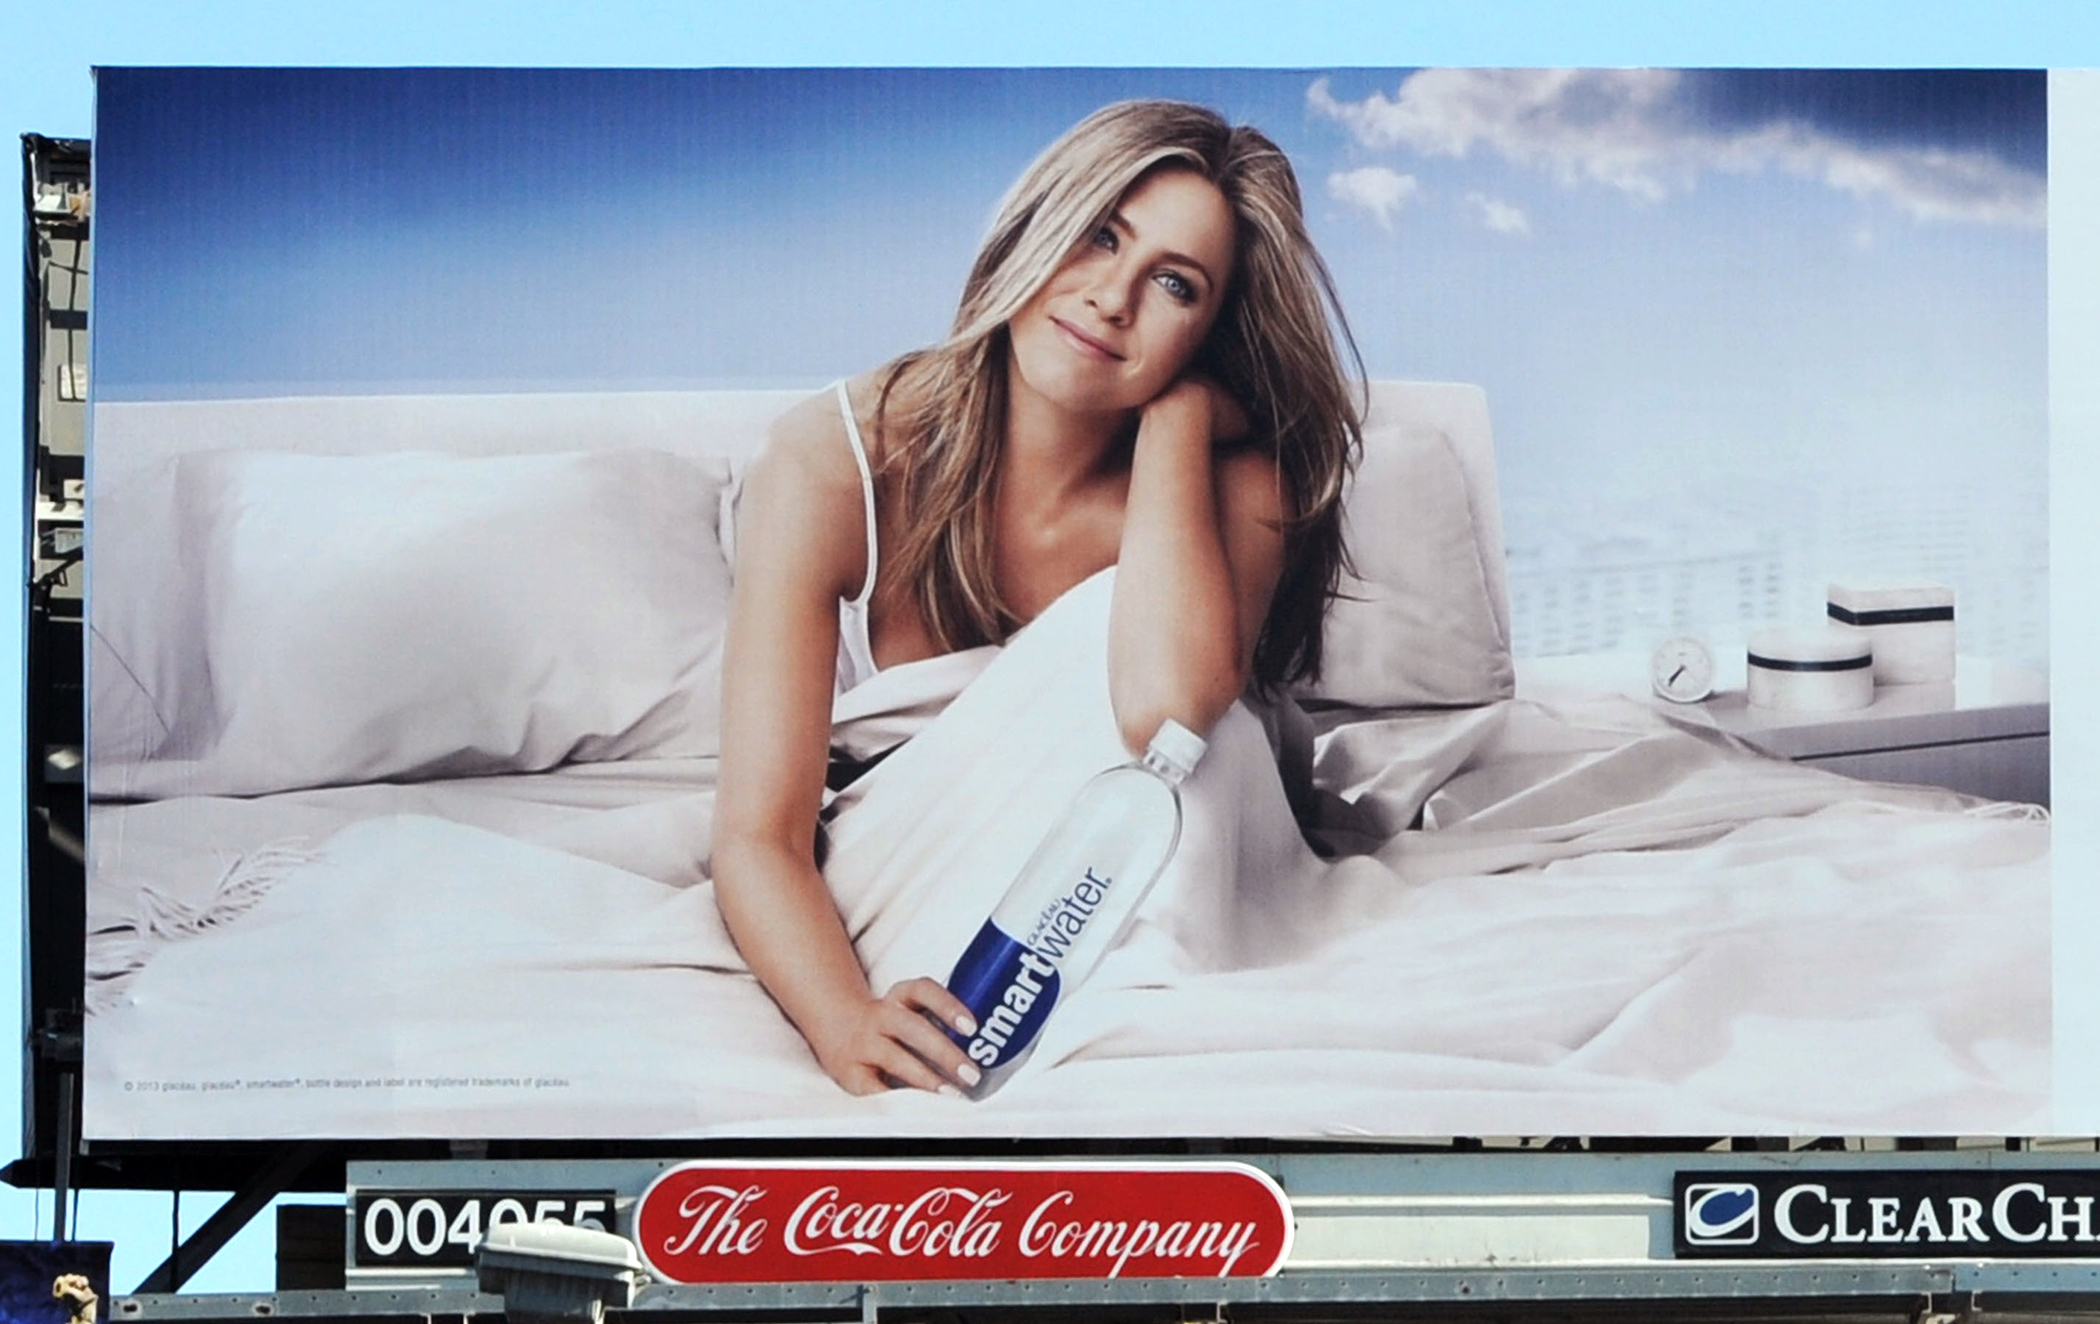 Jennifer Aniston stars in her new 'Smartwater' advert in Los Angeles. The 44 year old is pictured sitting in bed holding on to a 'smartwater' bottle. The new billboard campaign reads 'inspired by the clouds'.